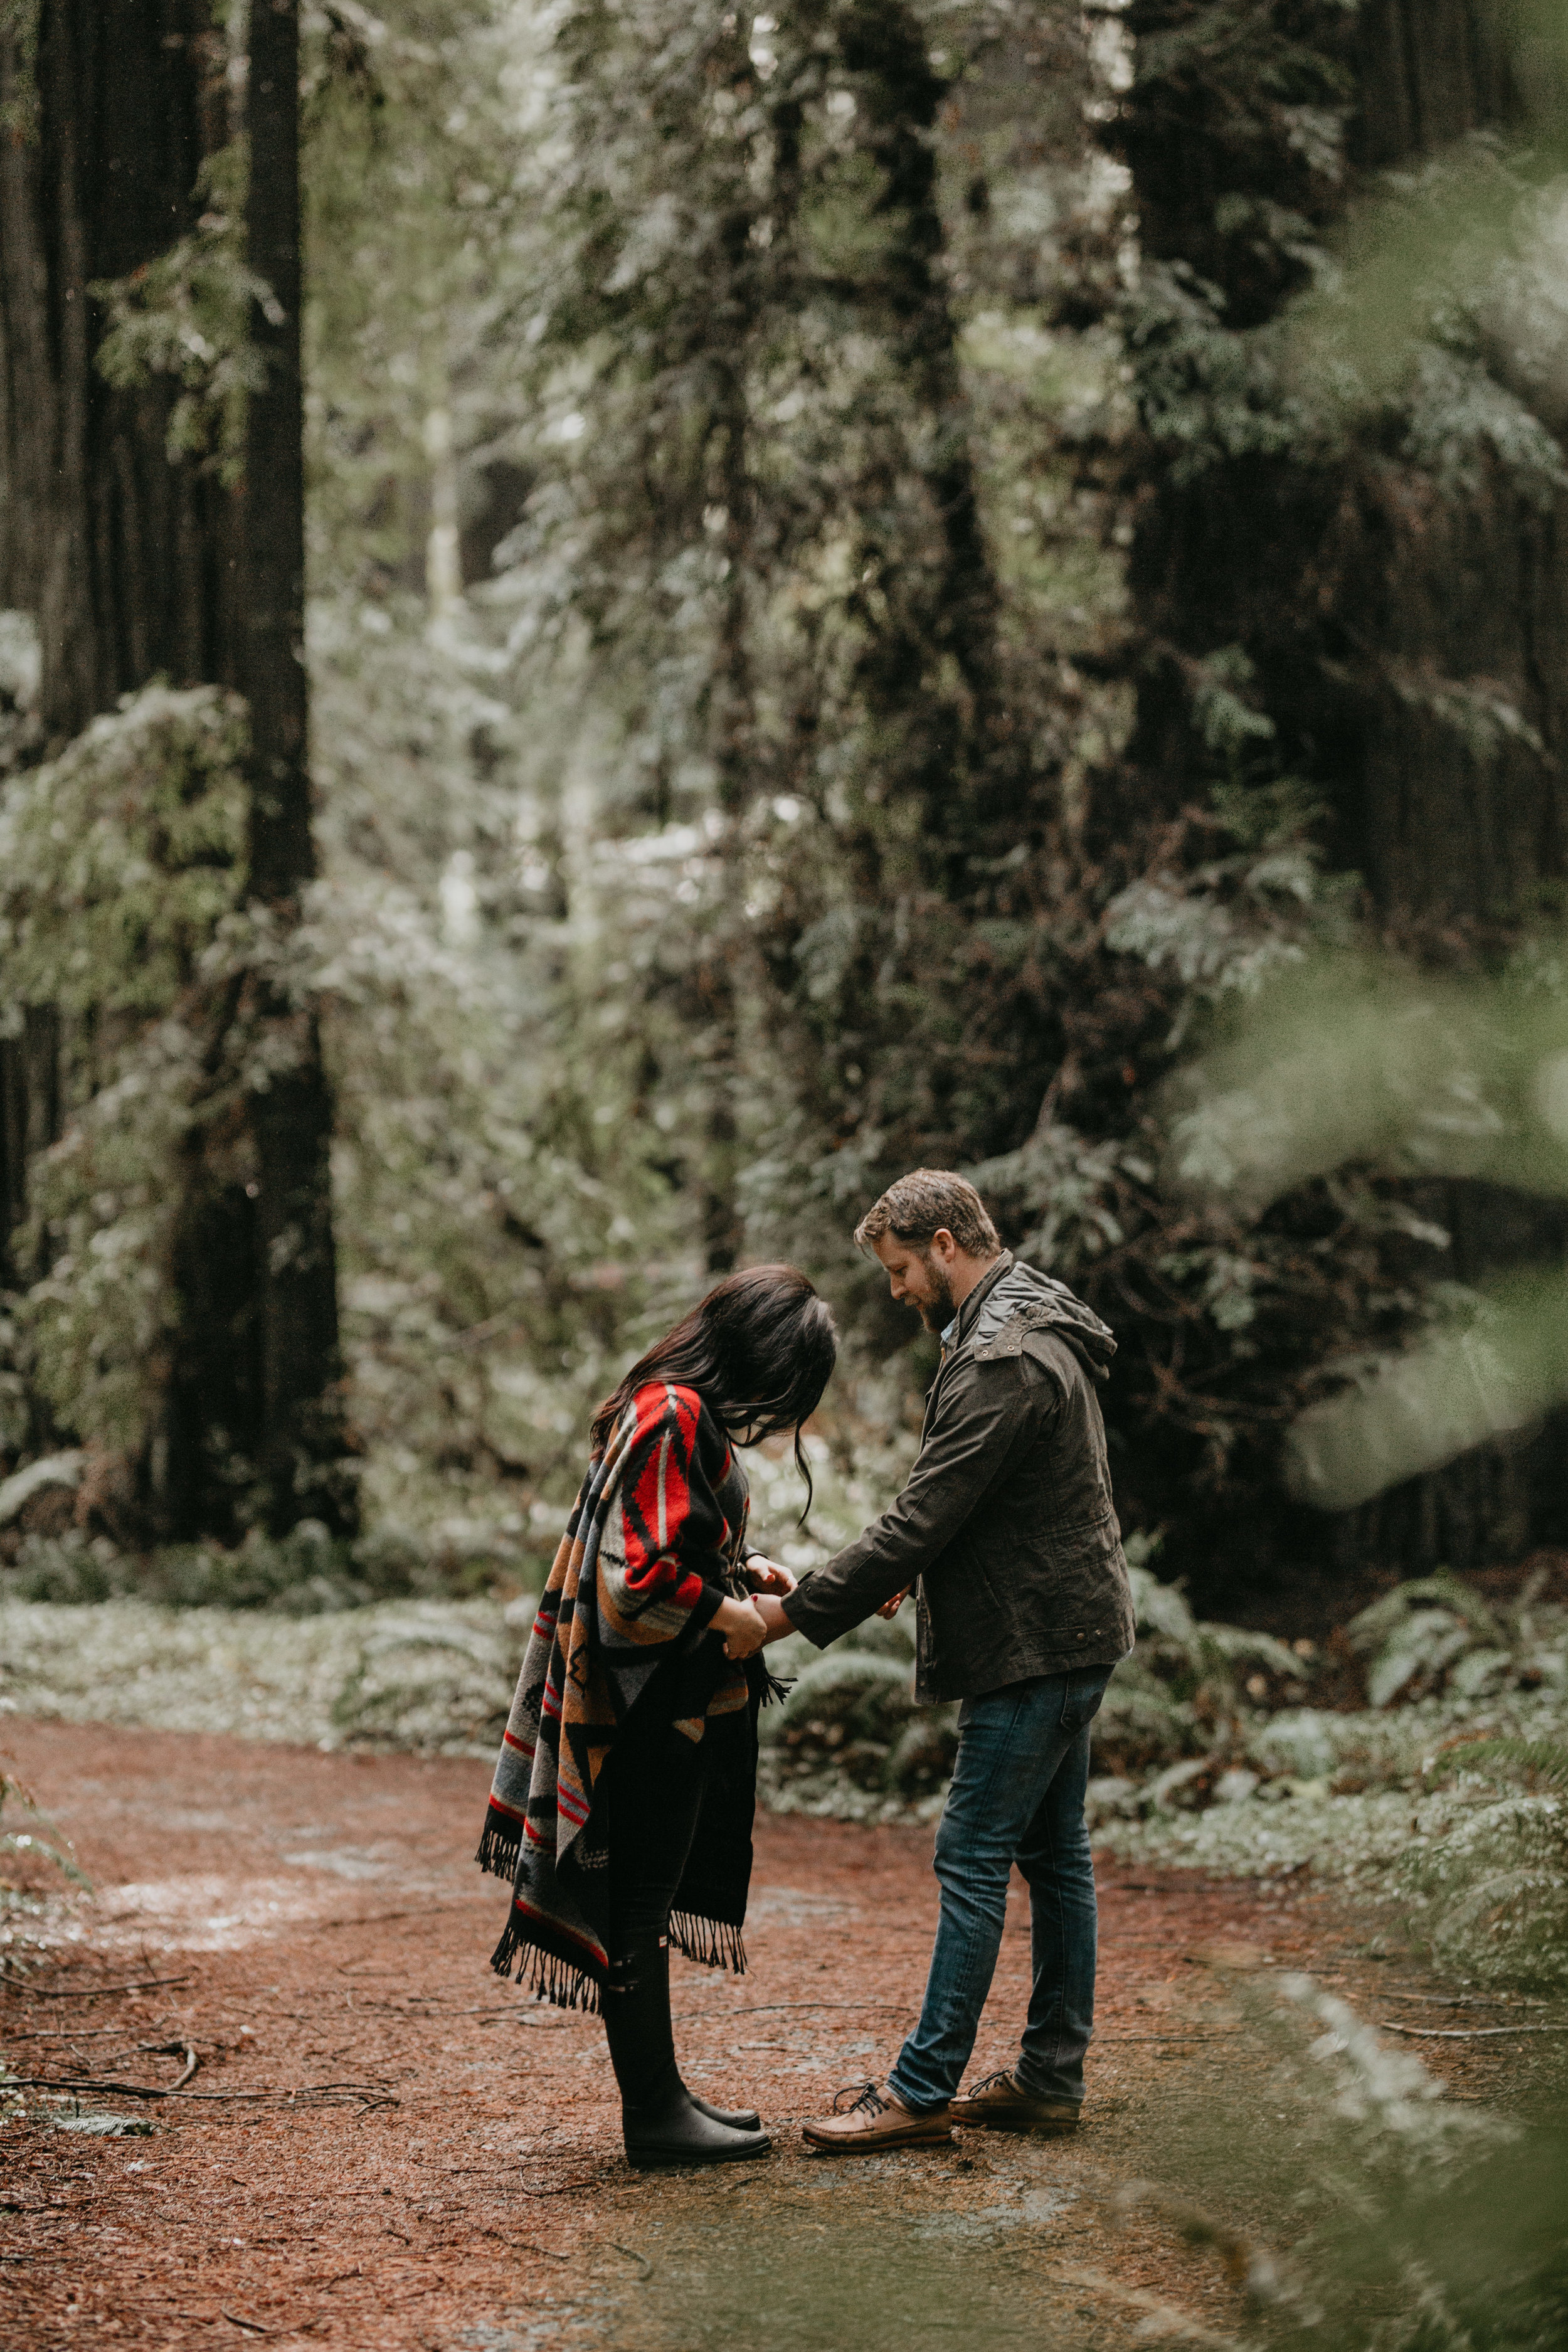 nicole-daacke-photography-redwoods-national-park-forest-rainy-foggy-adventure-engagement-session-humboldt-county-old-growth-redwood-tree-elopement-intimate-wedding-photographer-15.jpg